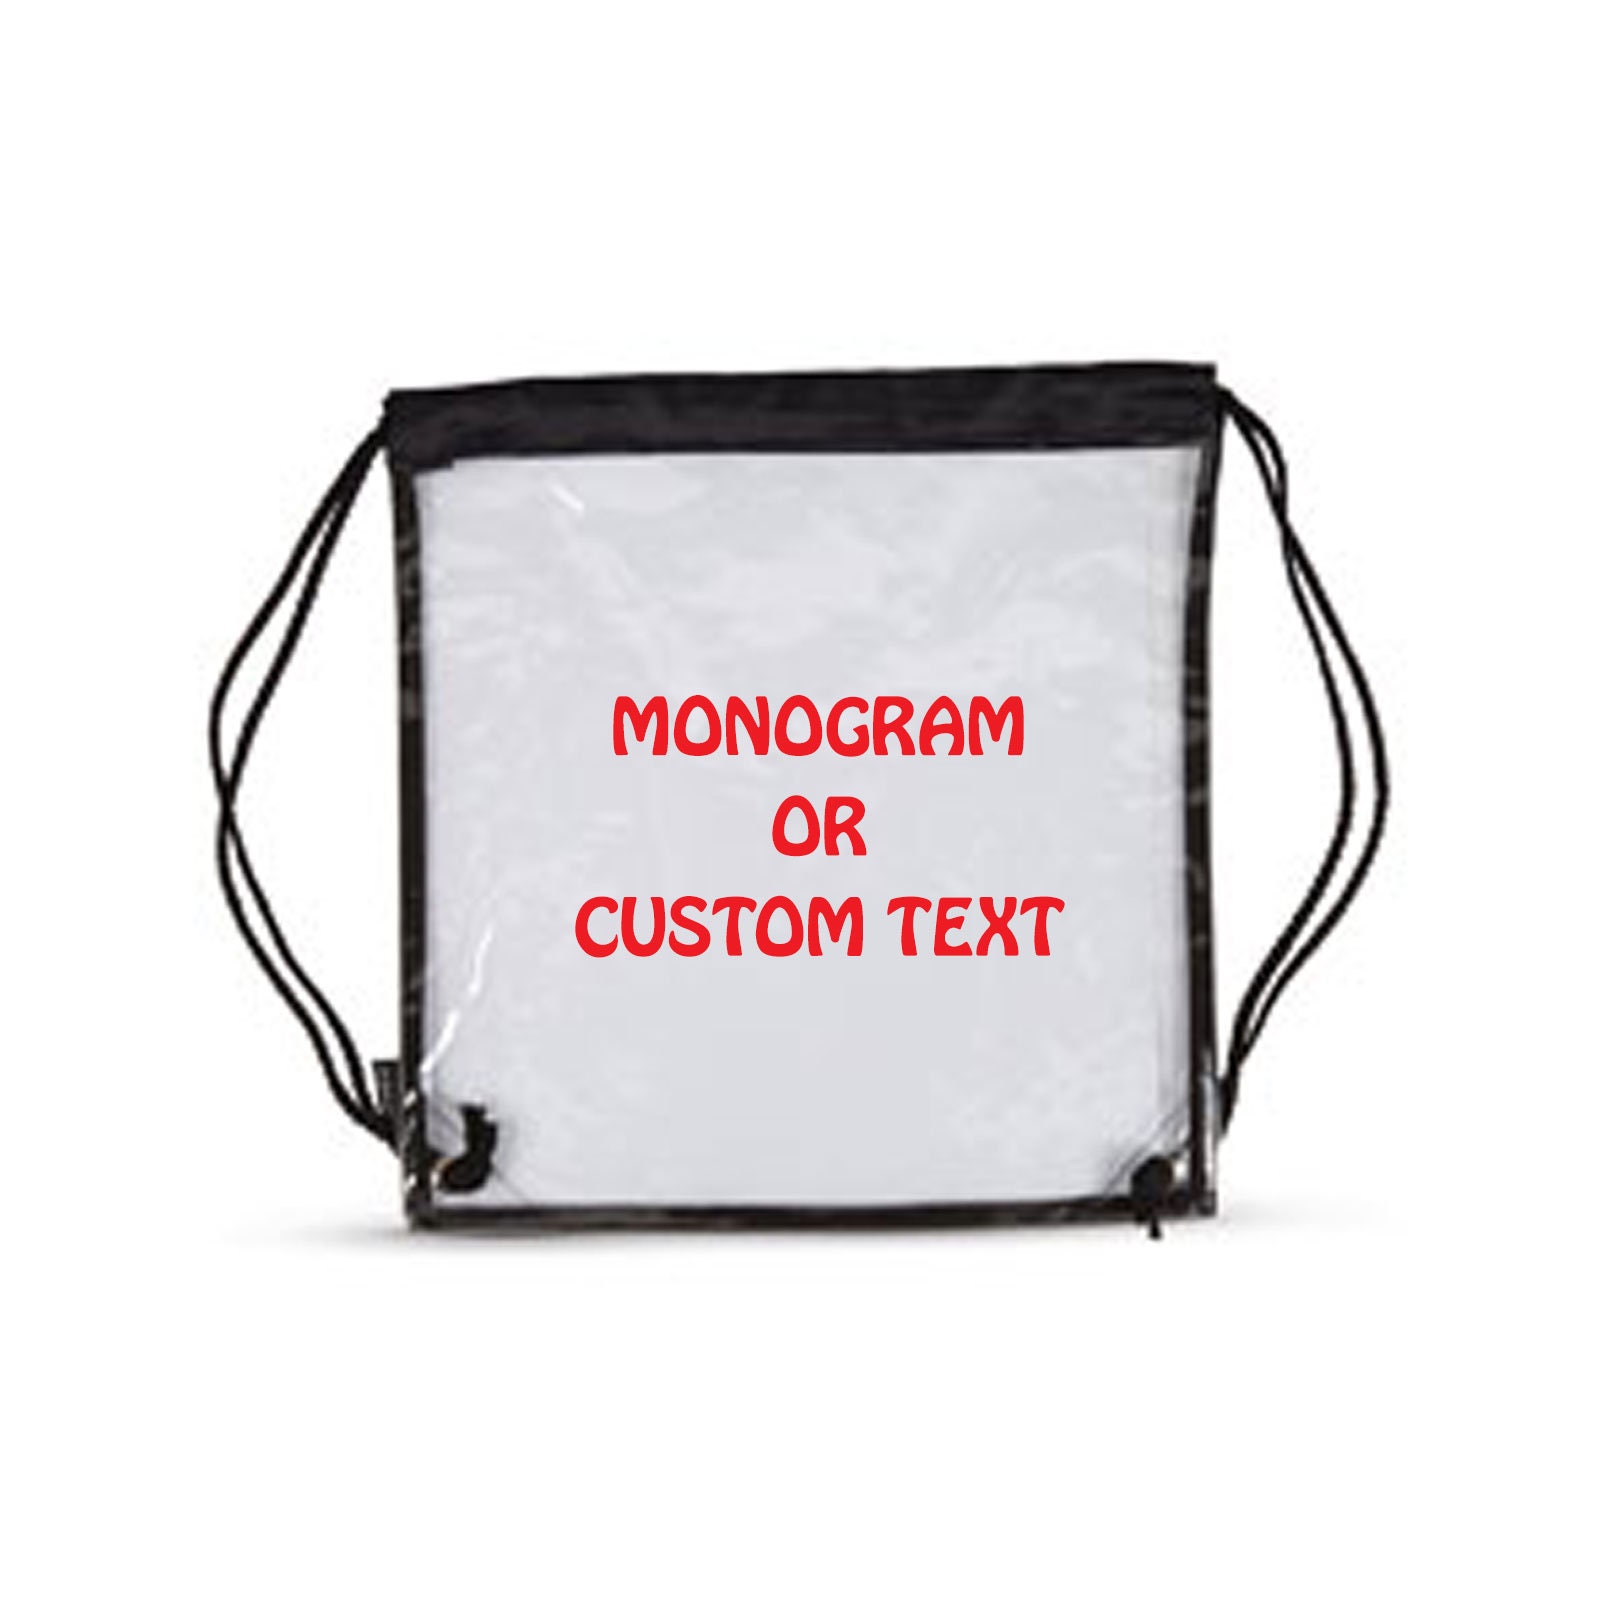 Clear Bag Policy, Event Security